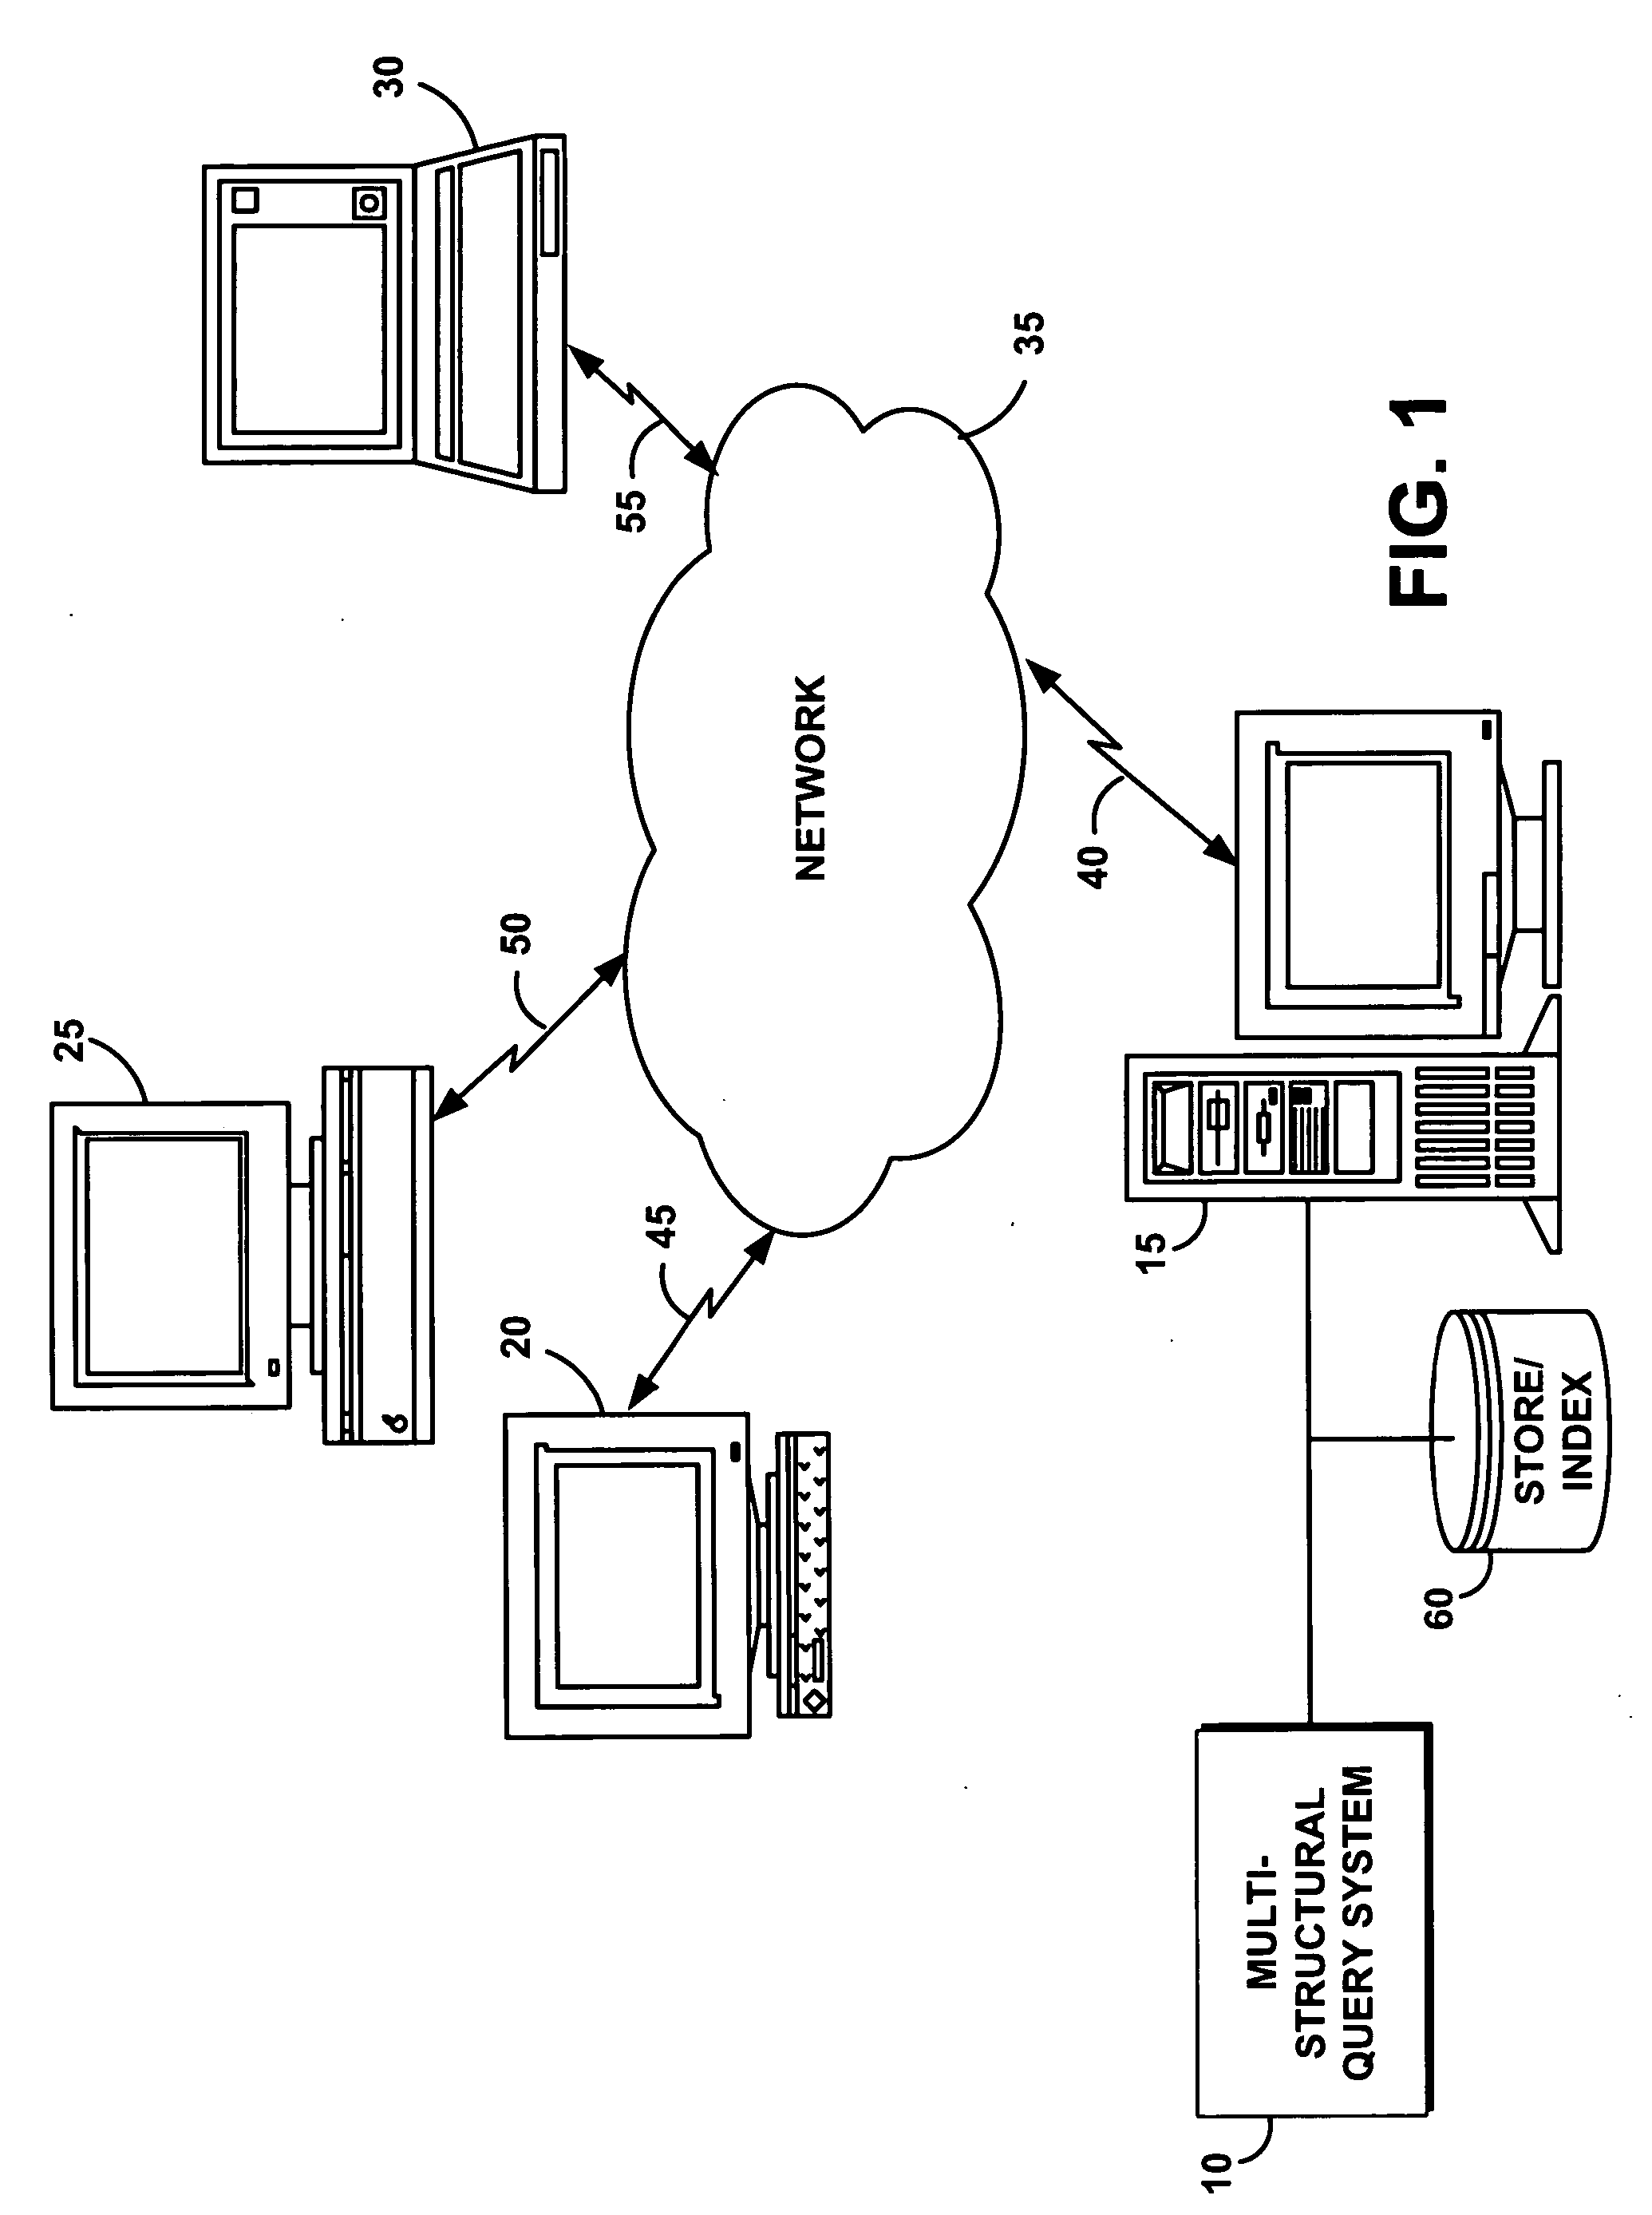 System and method for performing a high-level multi-dimensional query on a multi-structural database